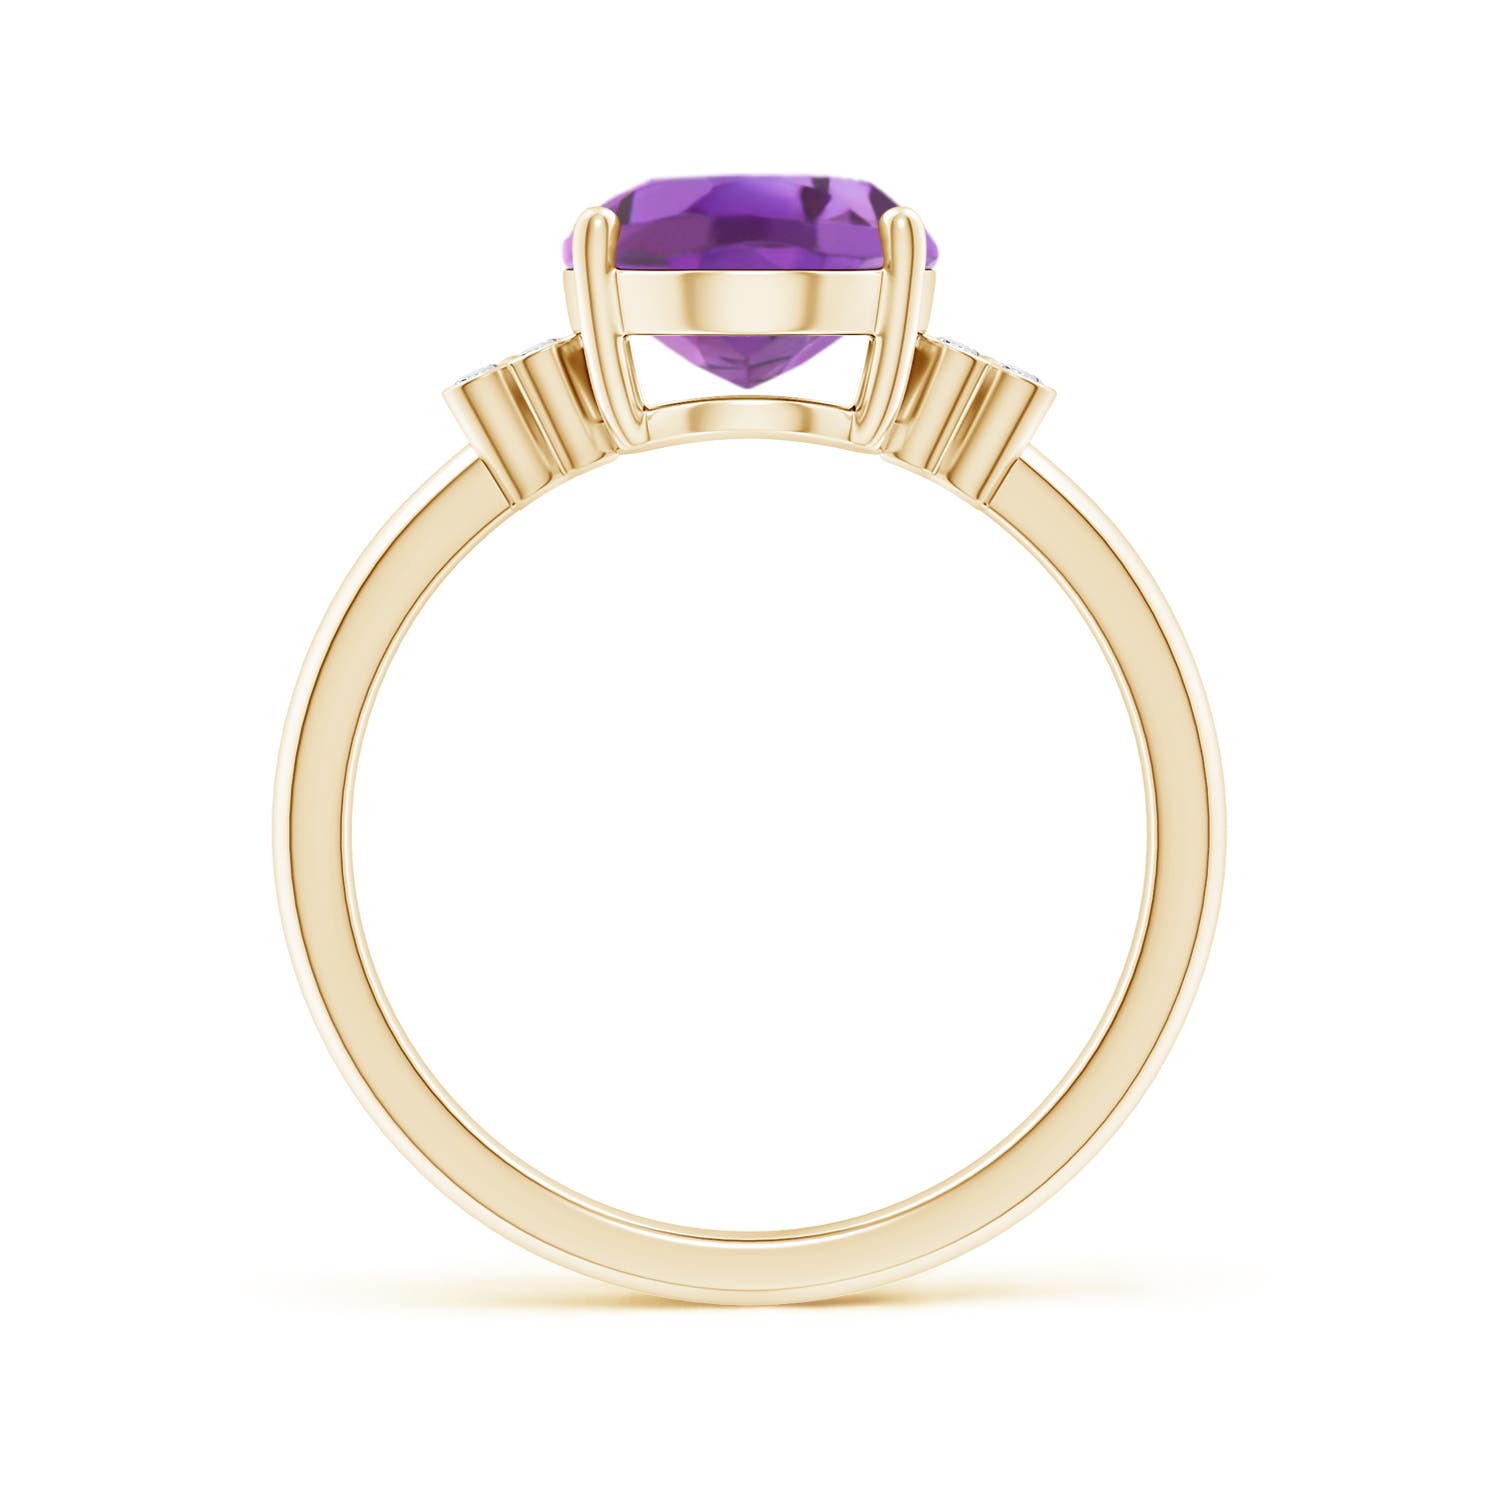 A - Amethyst / 2.36 CT / 14 KT Yellow Gold